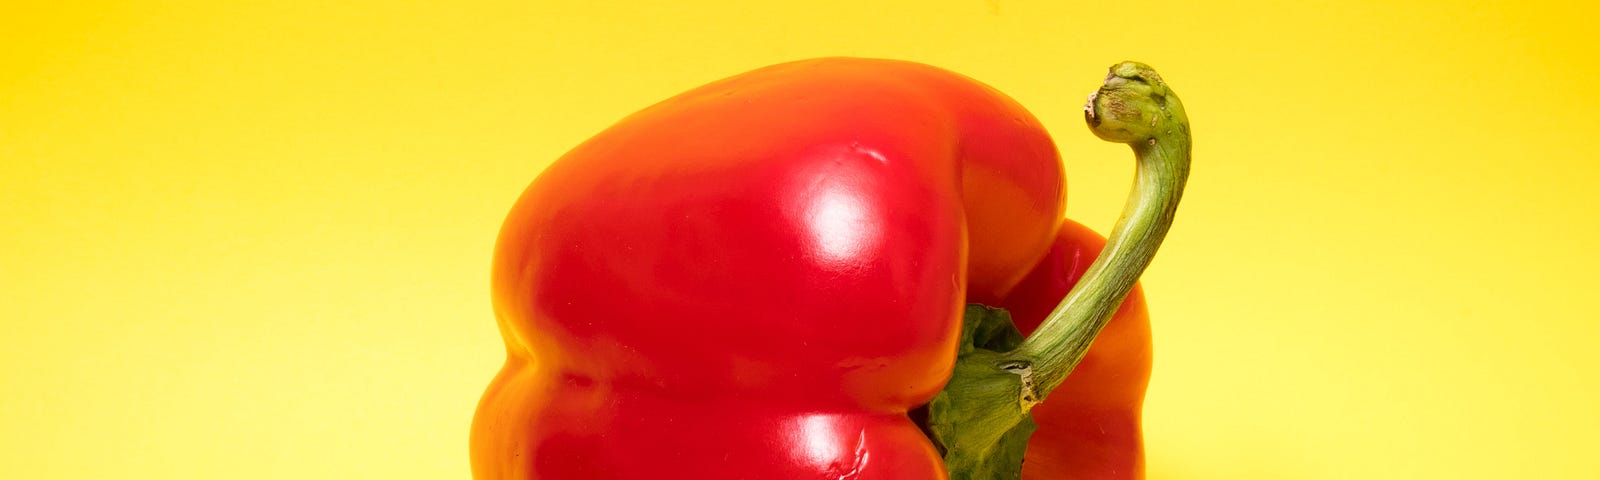 A red bell pepper on a yellow background